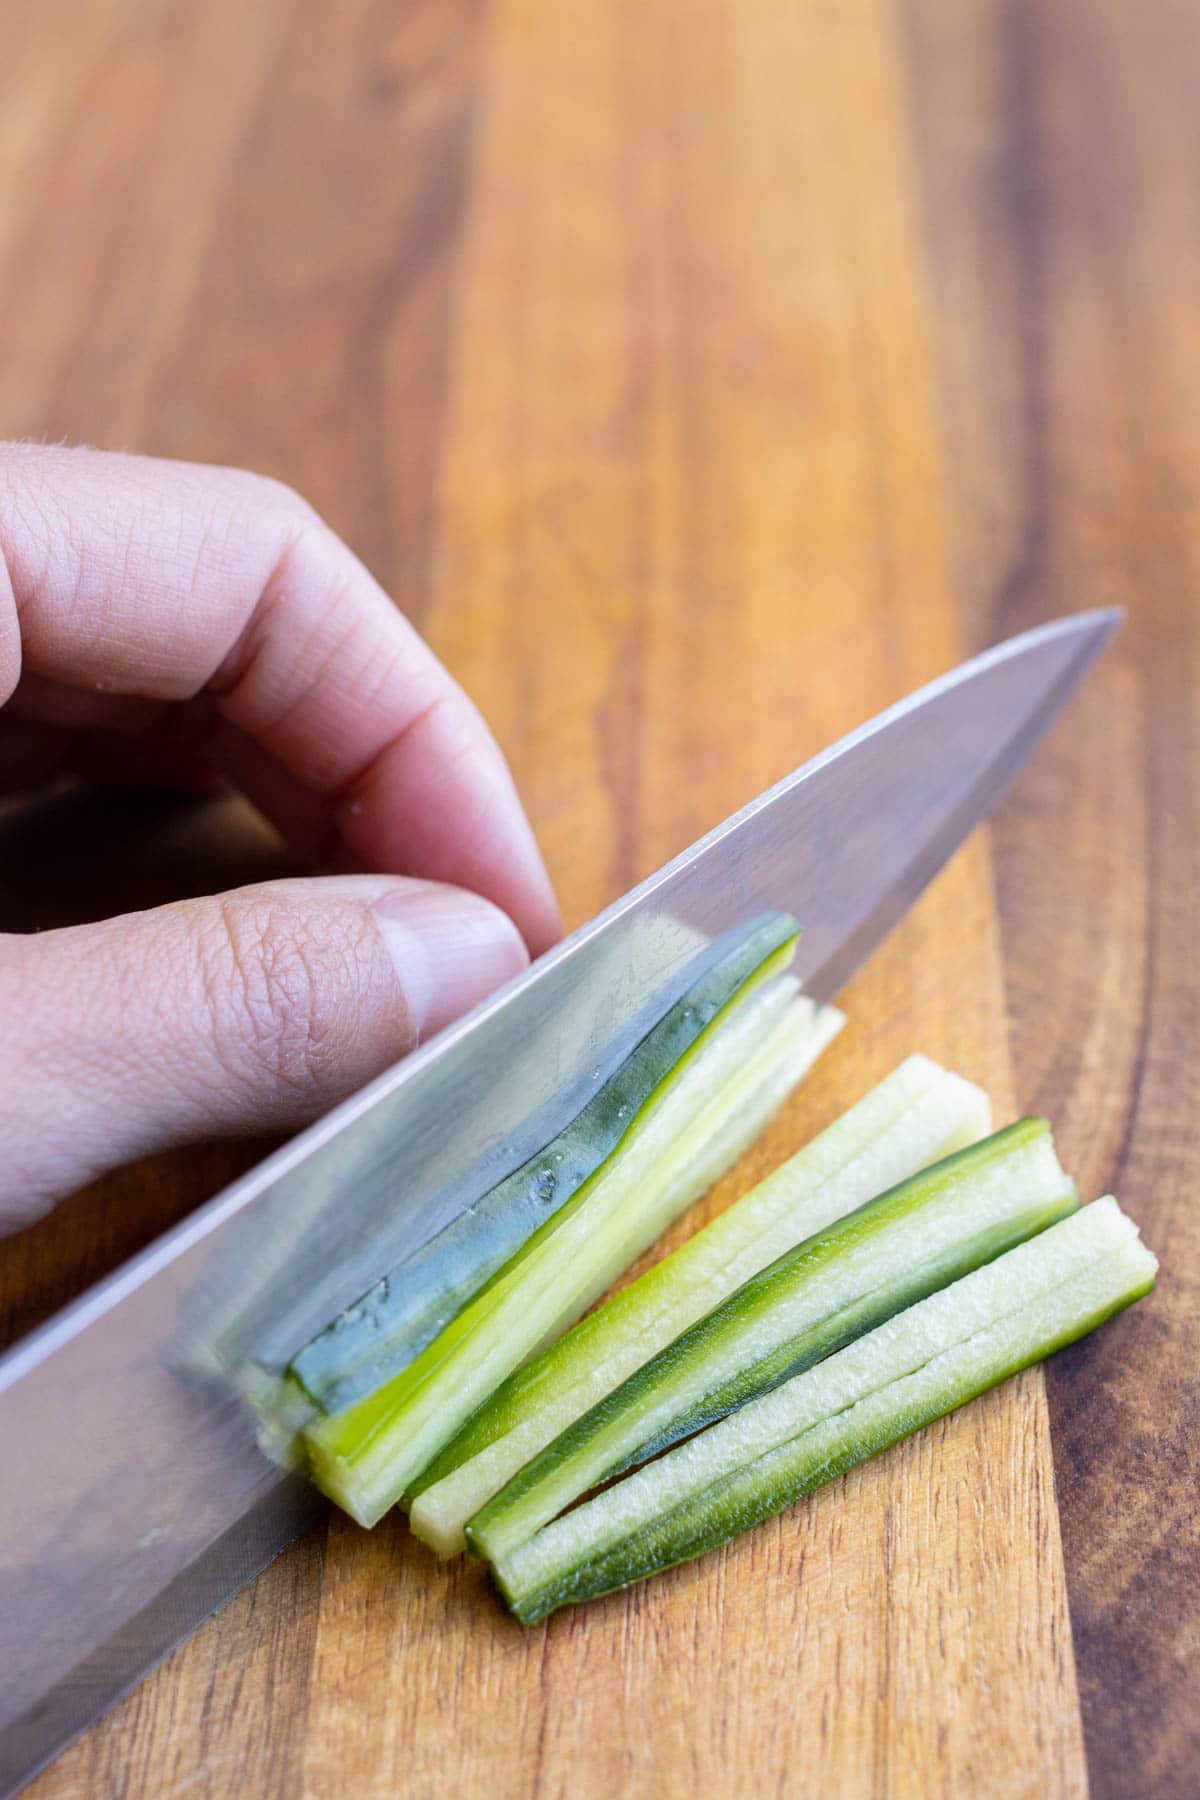 Stacked cucumber planks are cut into Julienne strips.